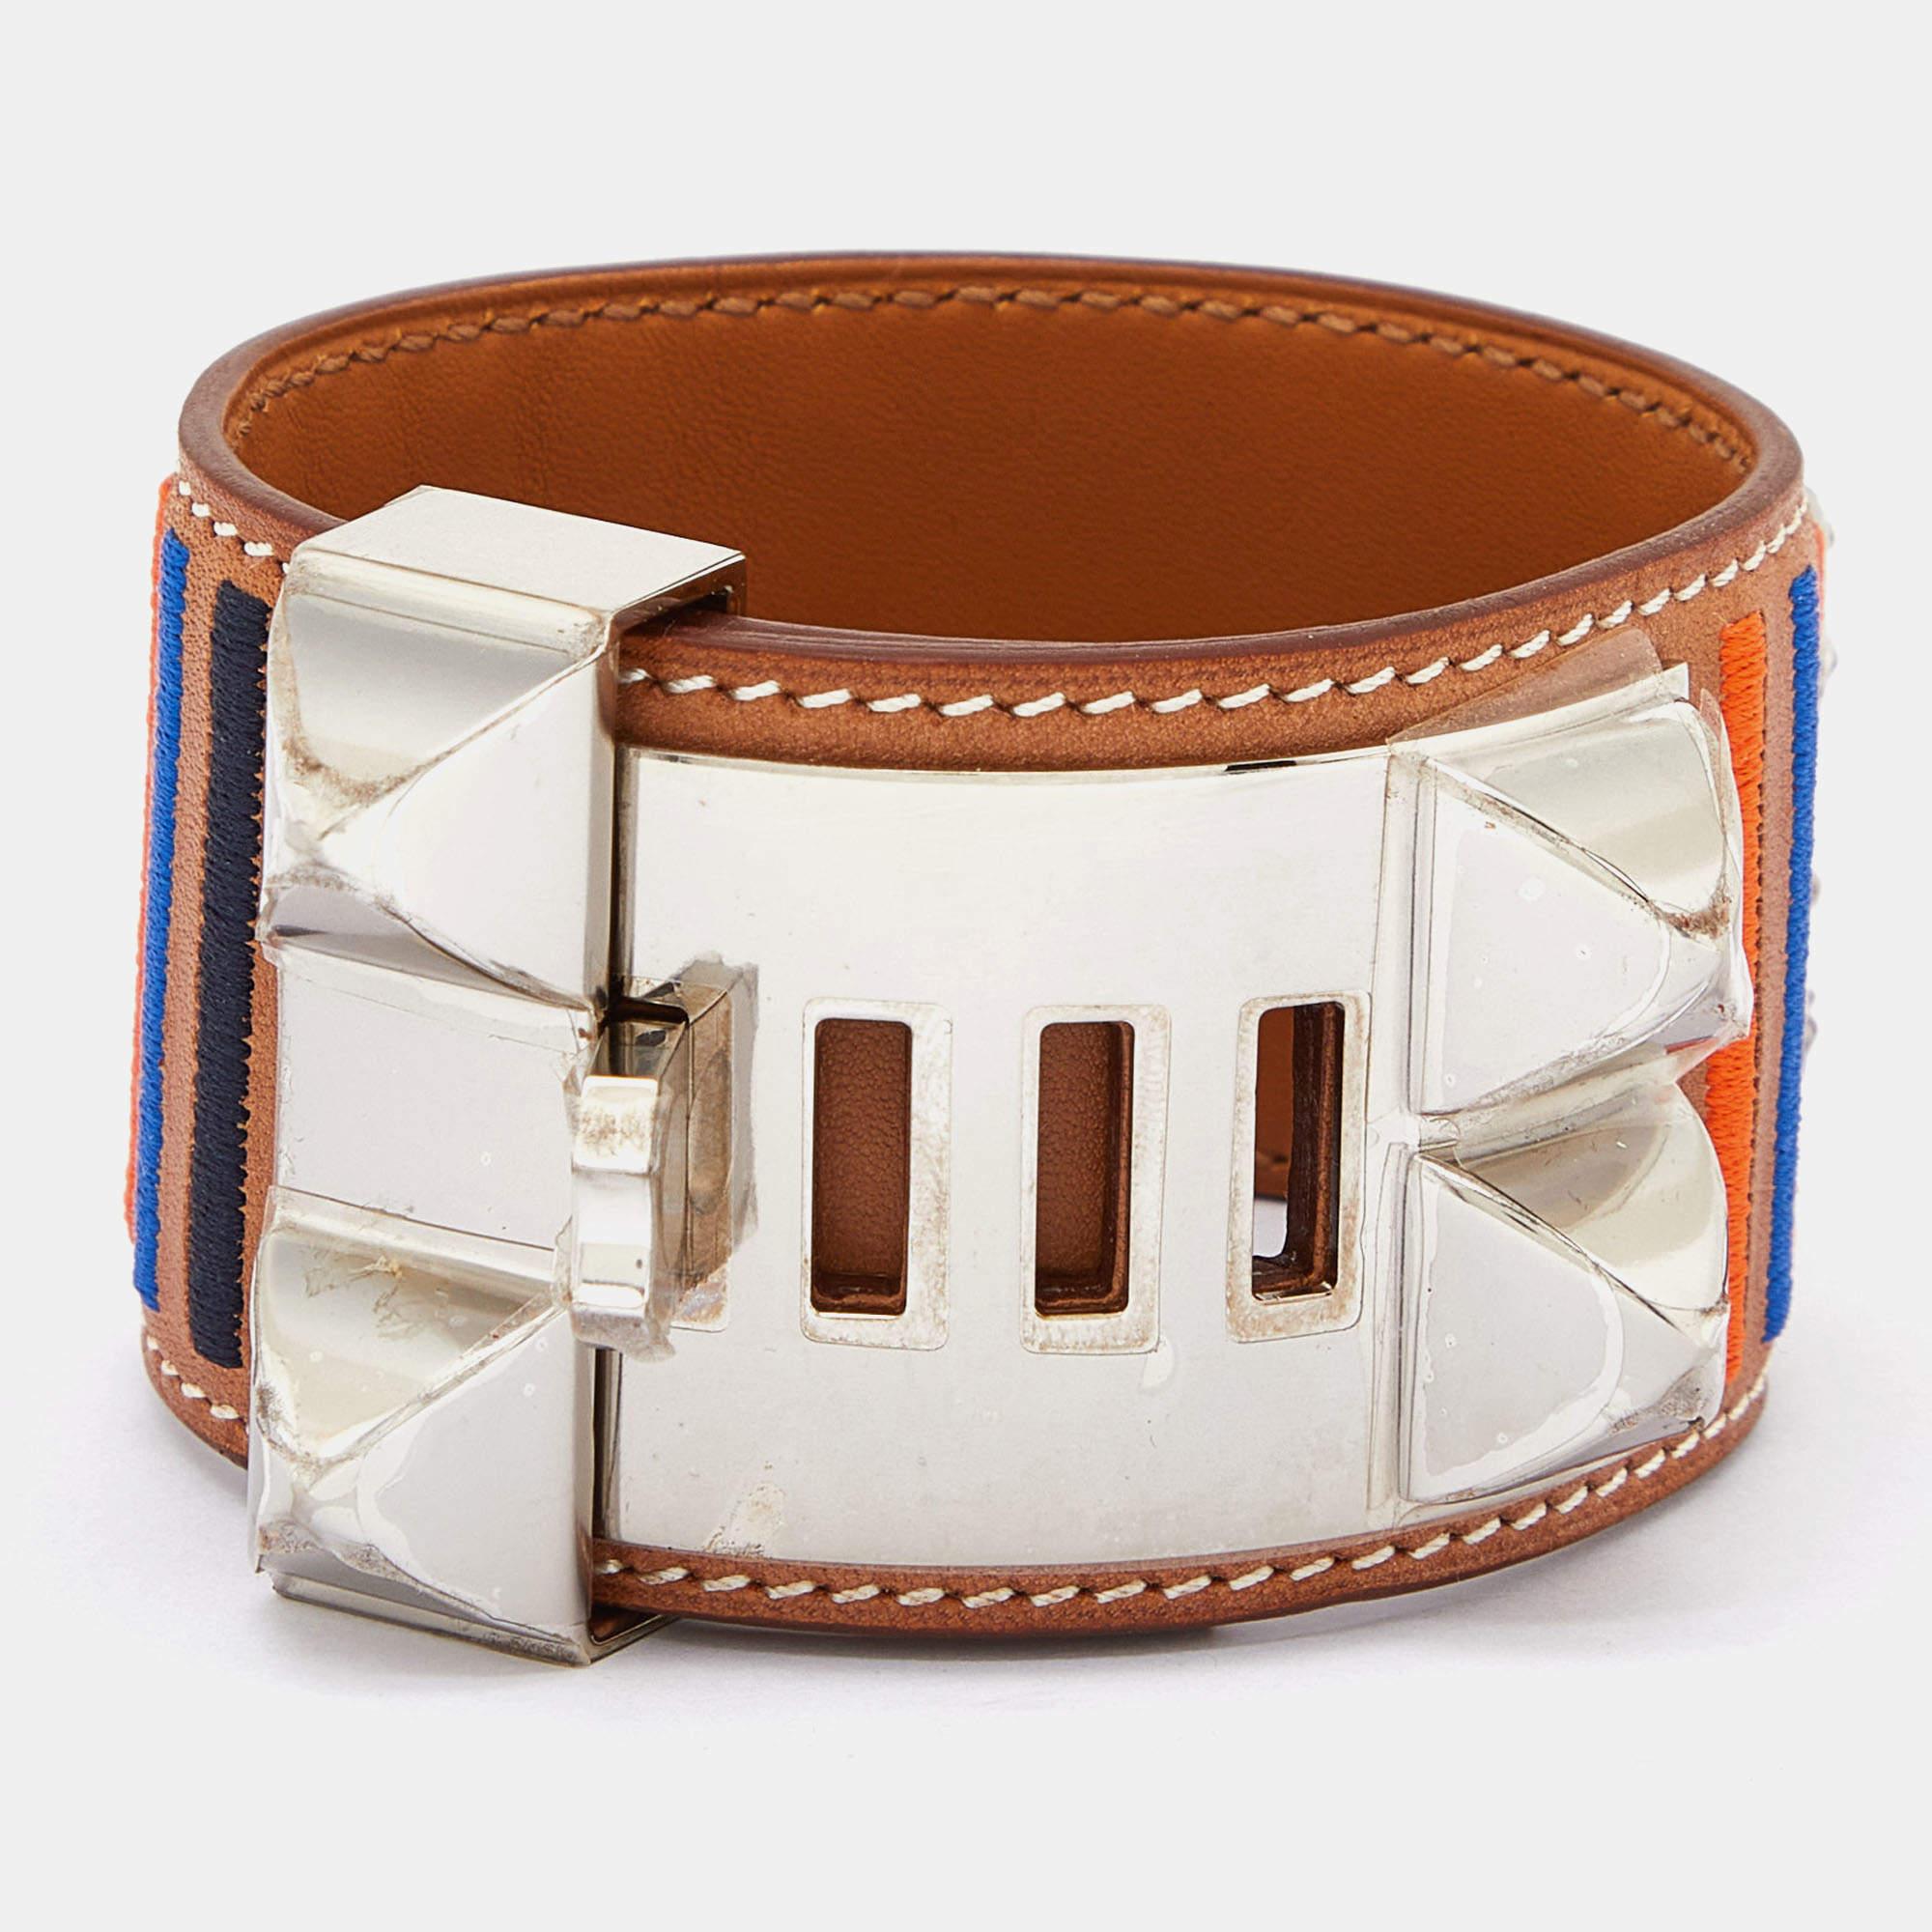 This instantly recognizable bracelet is from the Collier de Chien collection by Hermès. The bracelet, made of striped leather, is adorned with the iconic Collier de Chien motif in palladium-plated metal featuring pyramid studs and a ring. This bold